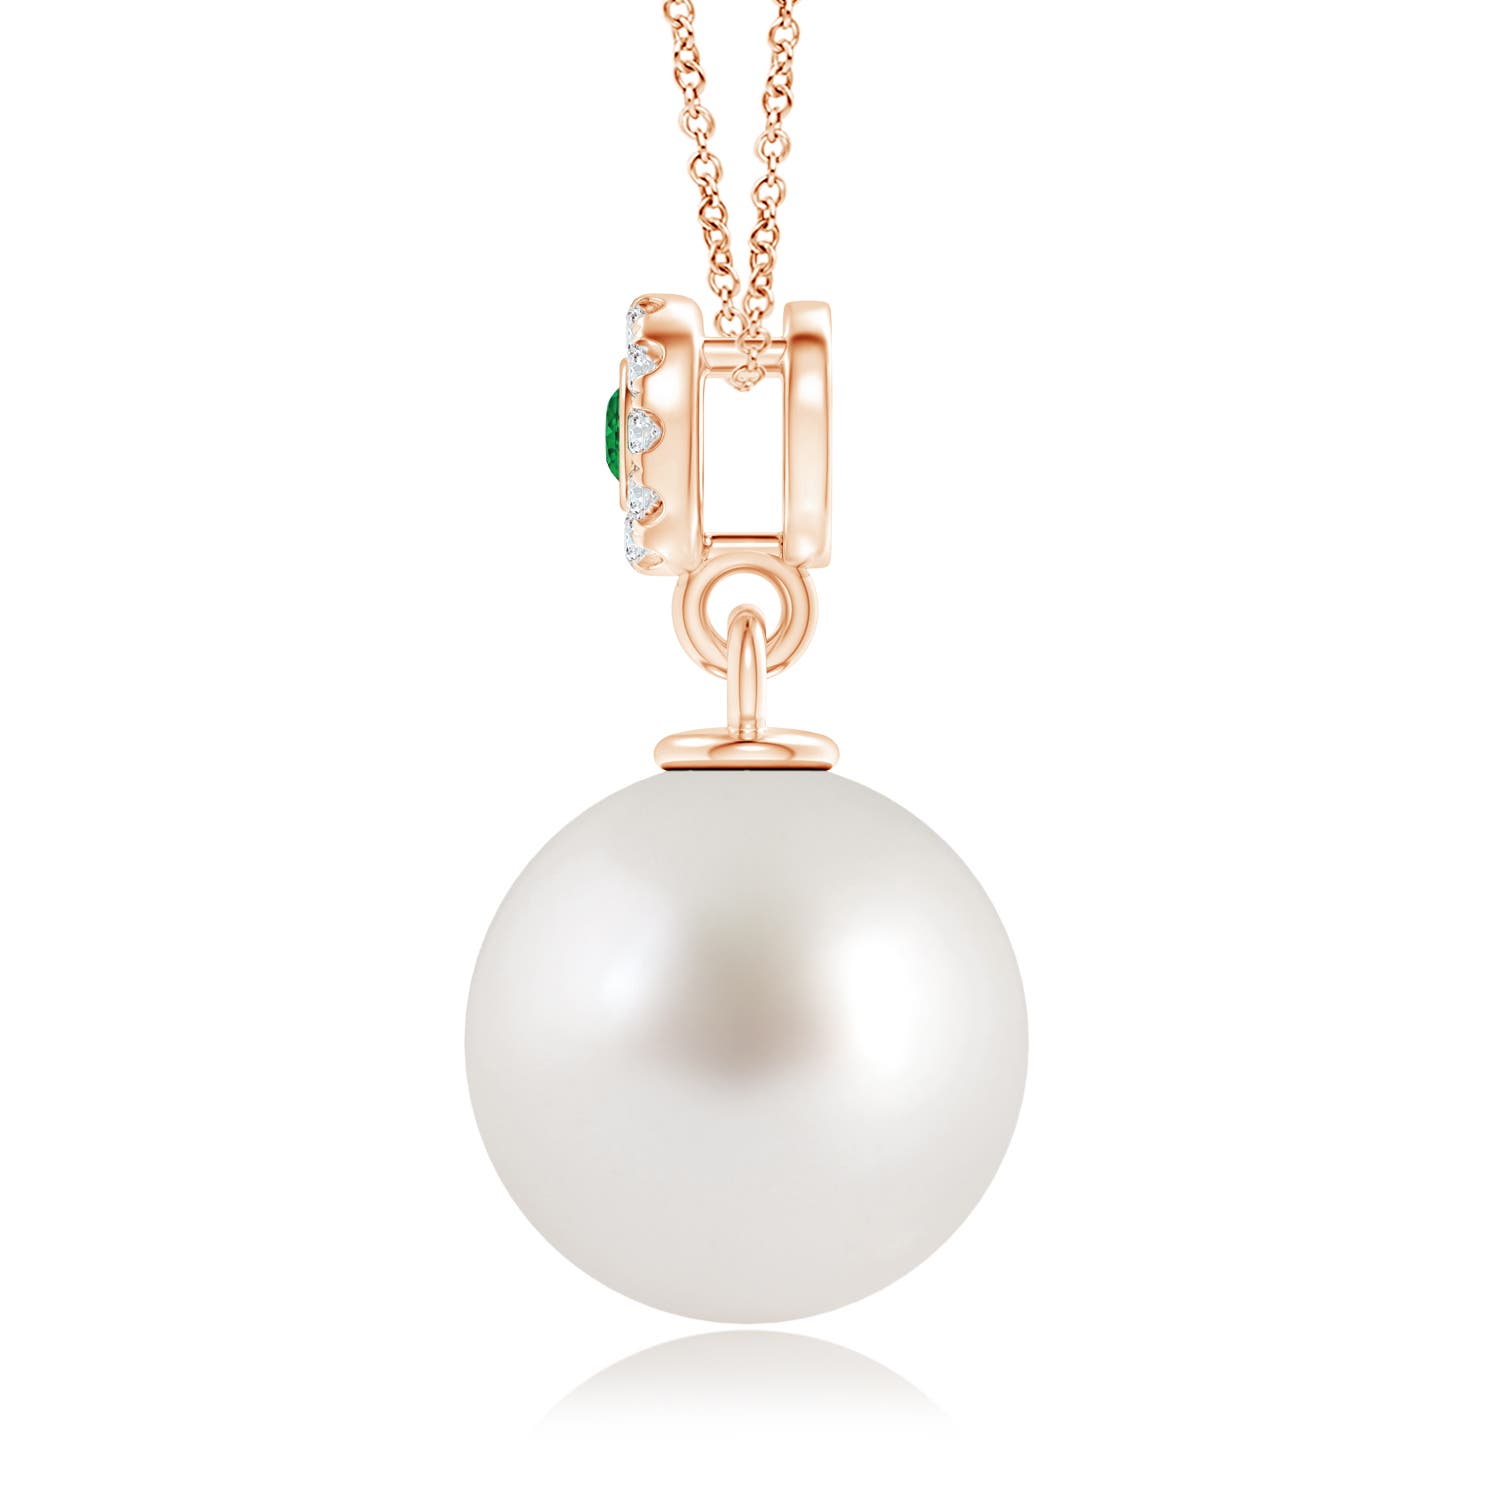 AAA - South Sea Cultured Pearl / 7.3 CT / 14 KT Rose Gold